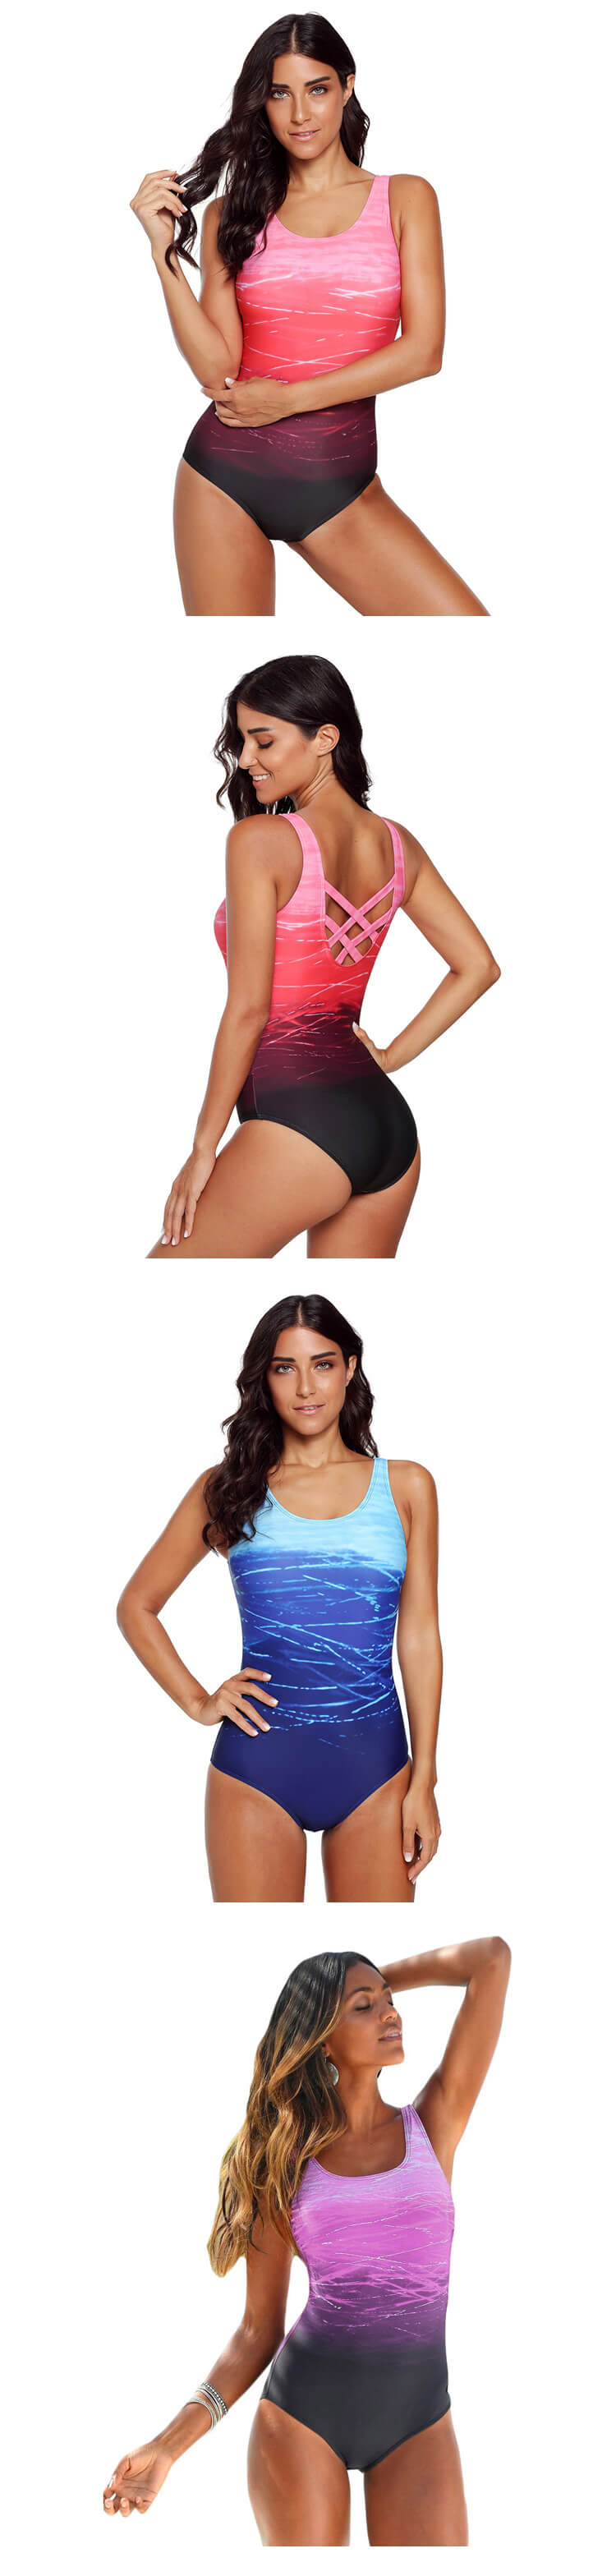 Women's One Piece Swimsuits for Athletic Training Swimwear (5)